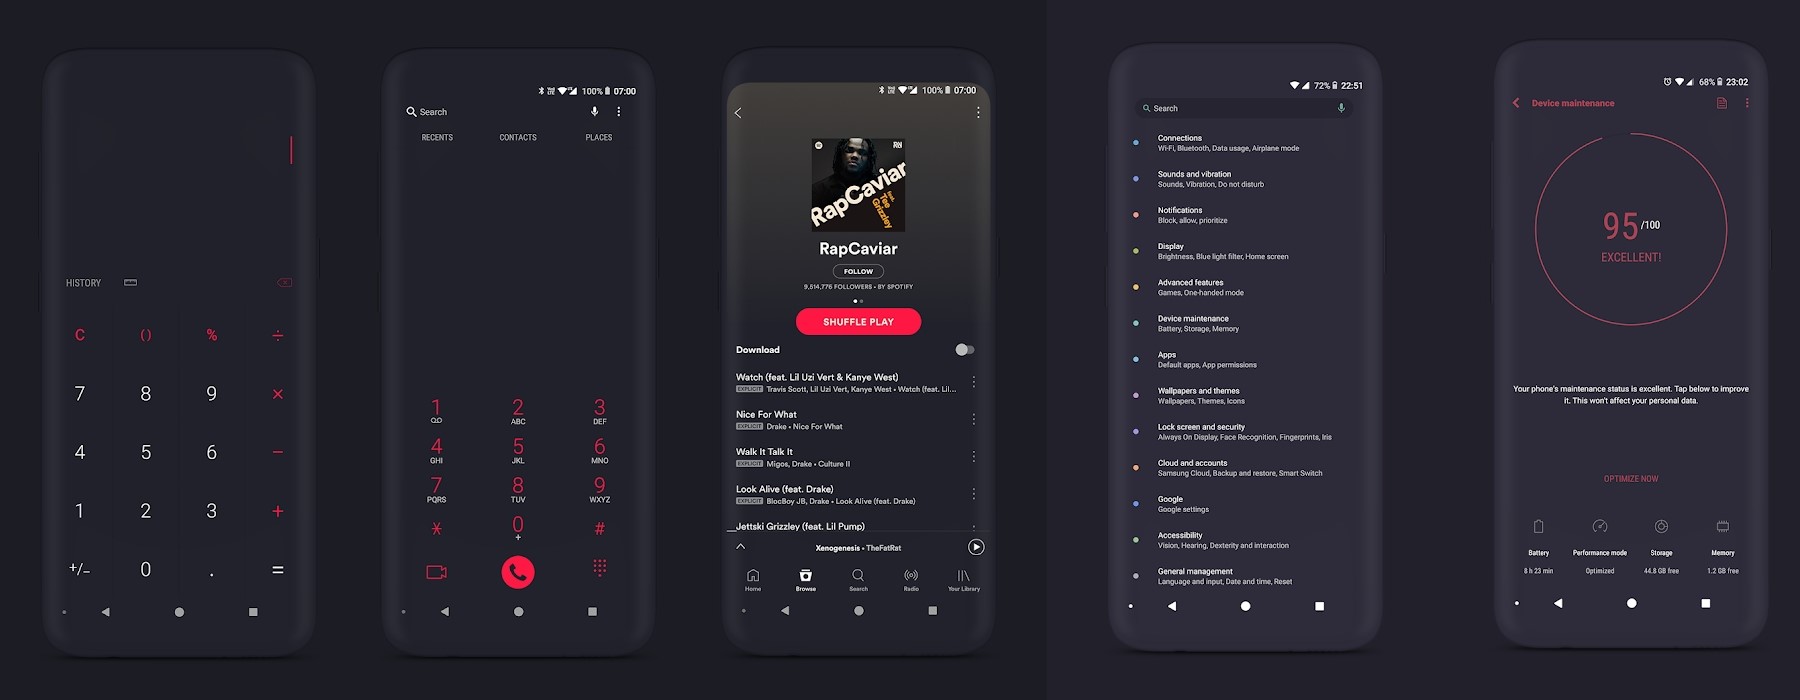 8 Best Substratum Themes for Samsung PBS